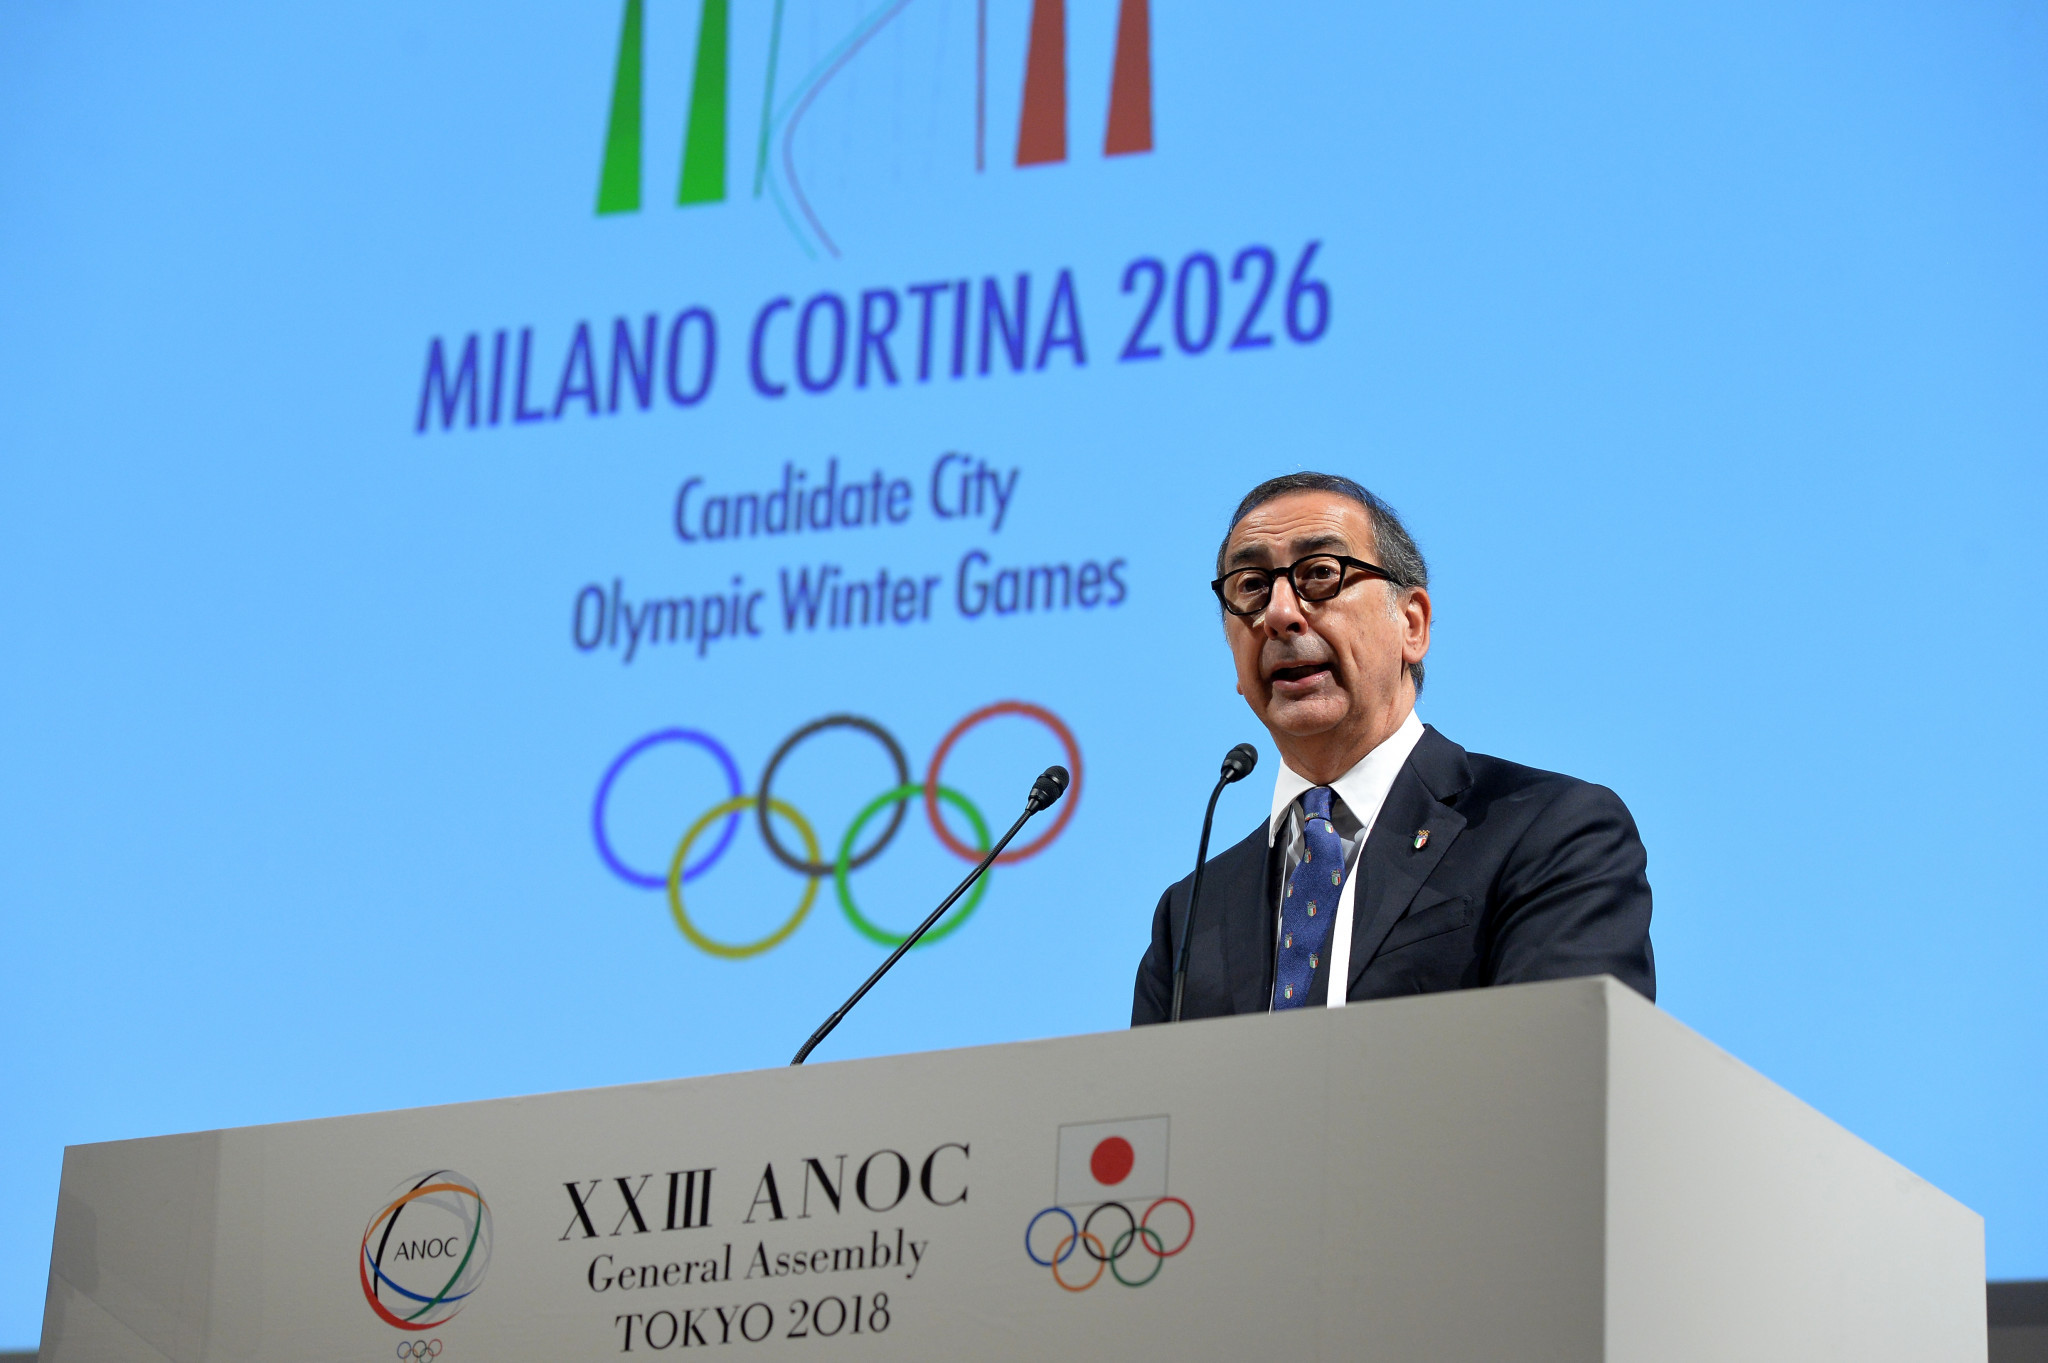 Milan Mayor Giuseppe Sala claimed the Italian bid for the 2026 Winter Olympic and Paralympics in tandem with Cortina d'Ampezzo would have a positive impact for local communities ©Getty Images